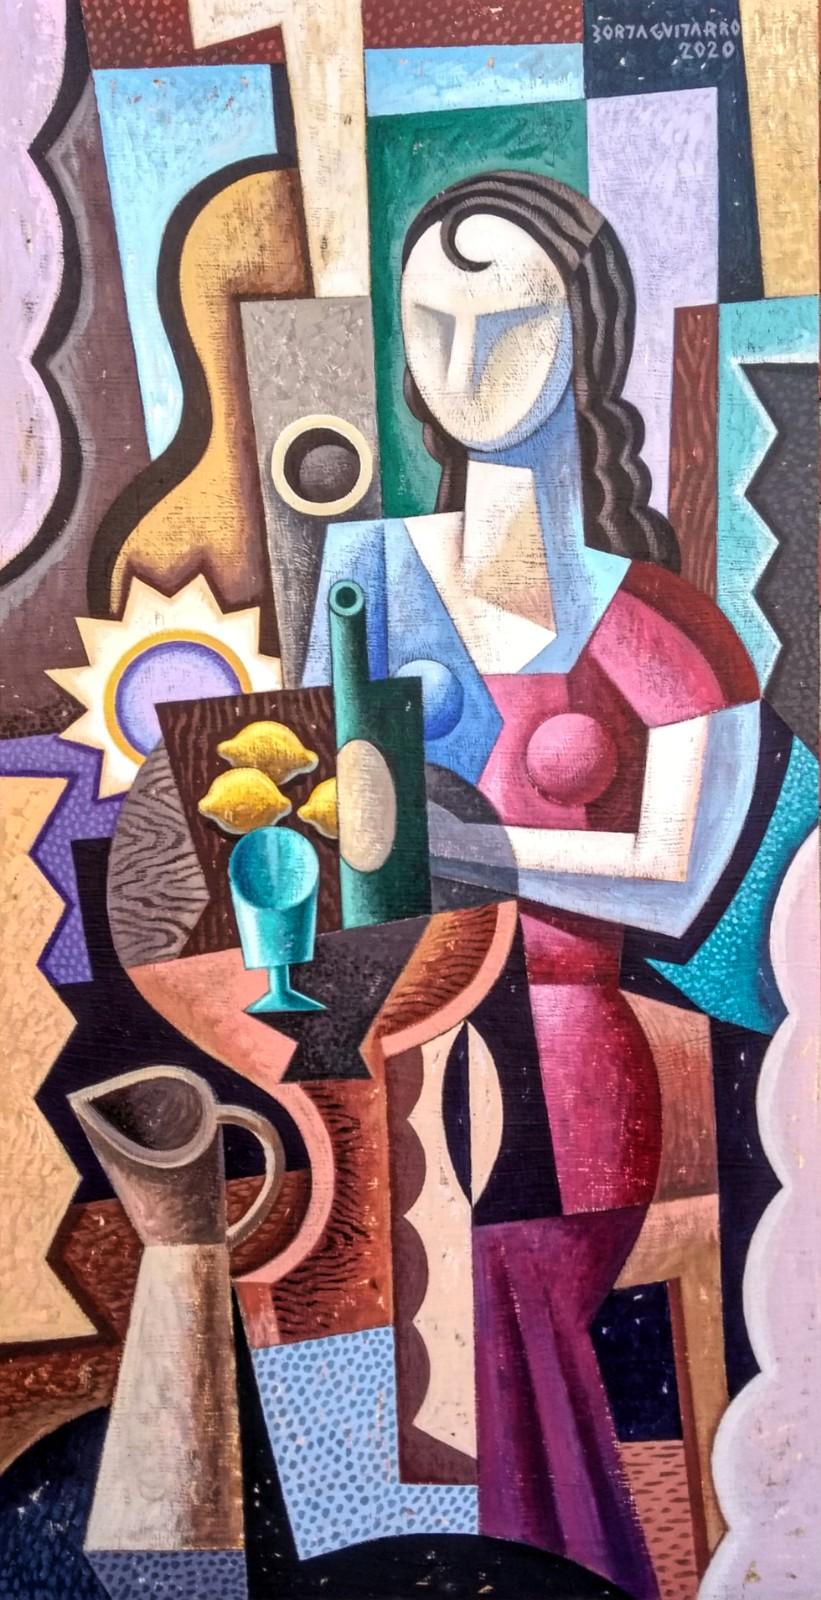 Mujer con Jarra - human female form abstract cubism figurative modern artwork